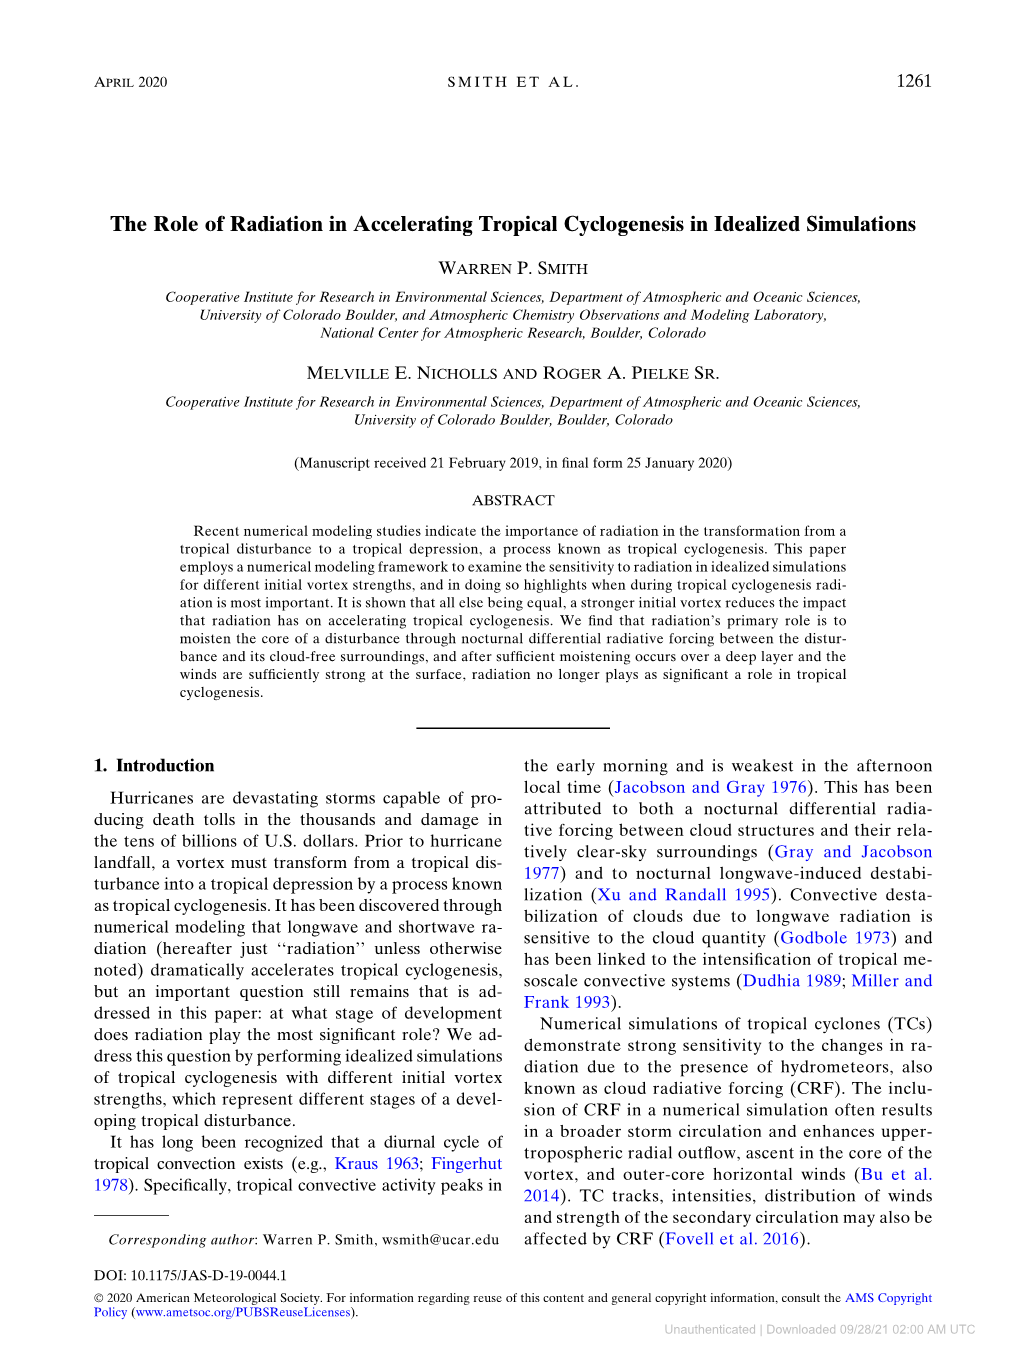 The Role of Radiation in Accelerating Tropical Cyclogenesis in Idealized Simulations